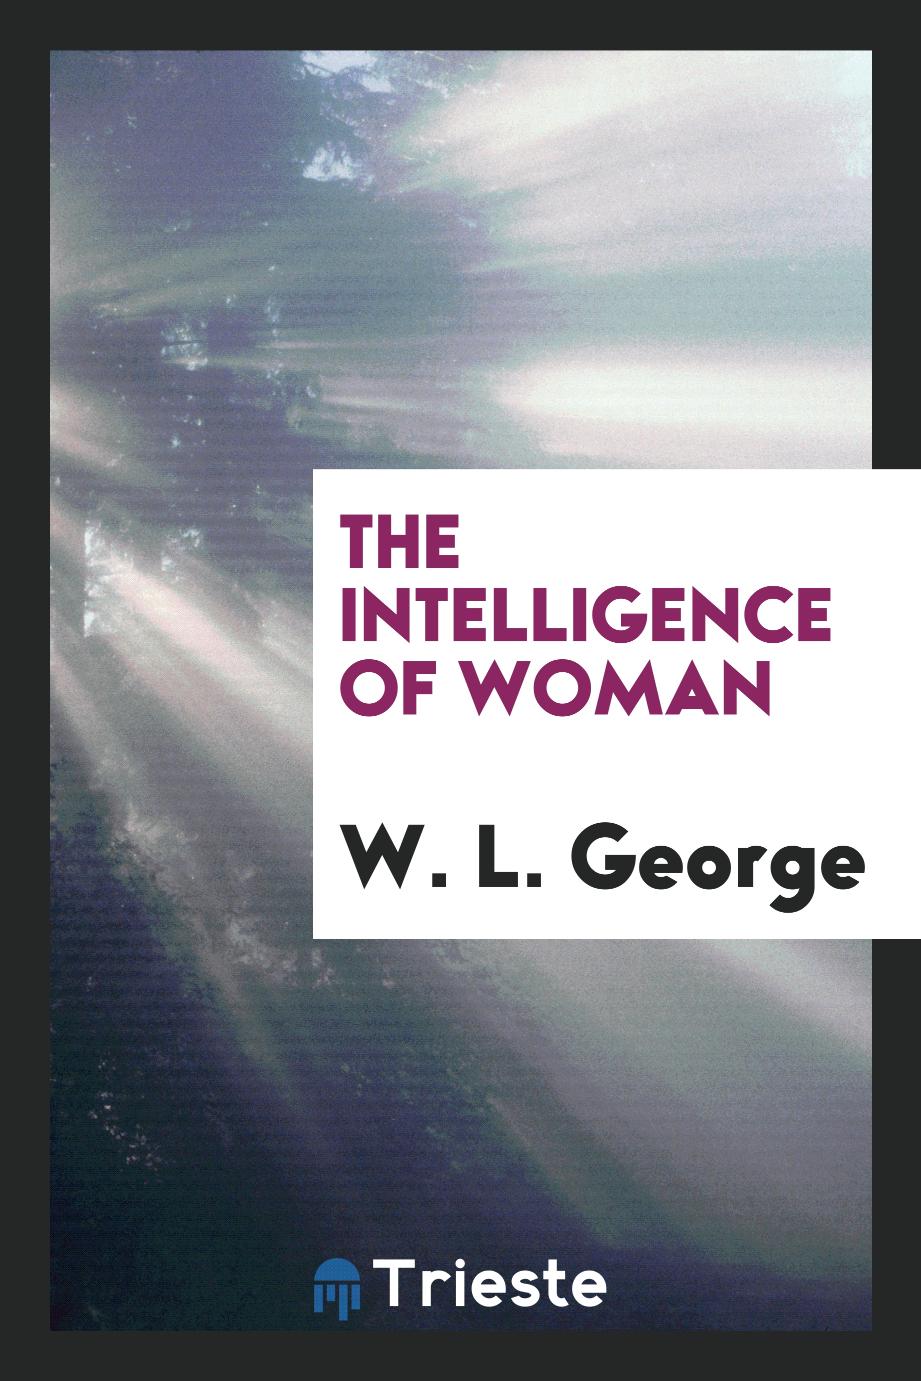 The intelligence of woman